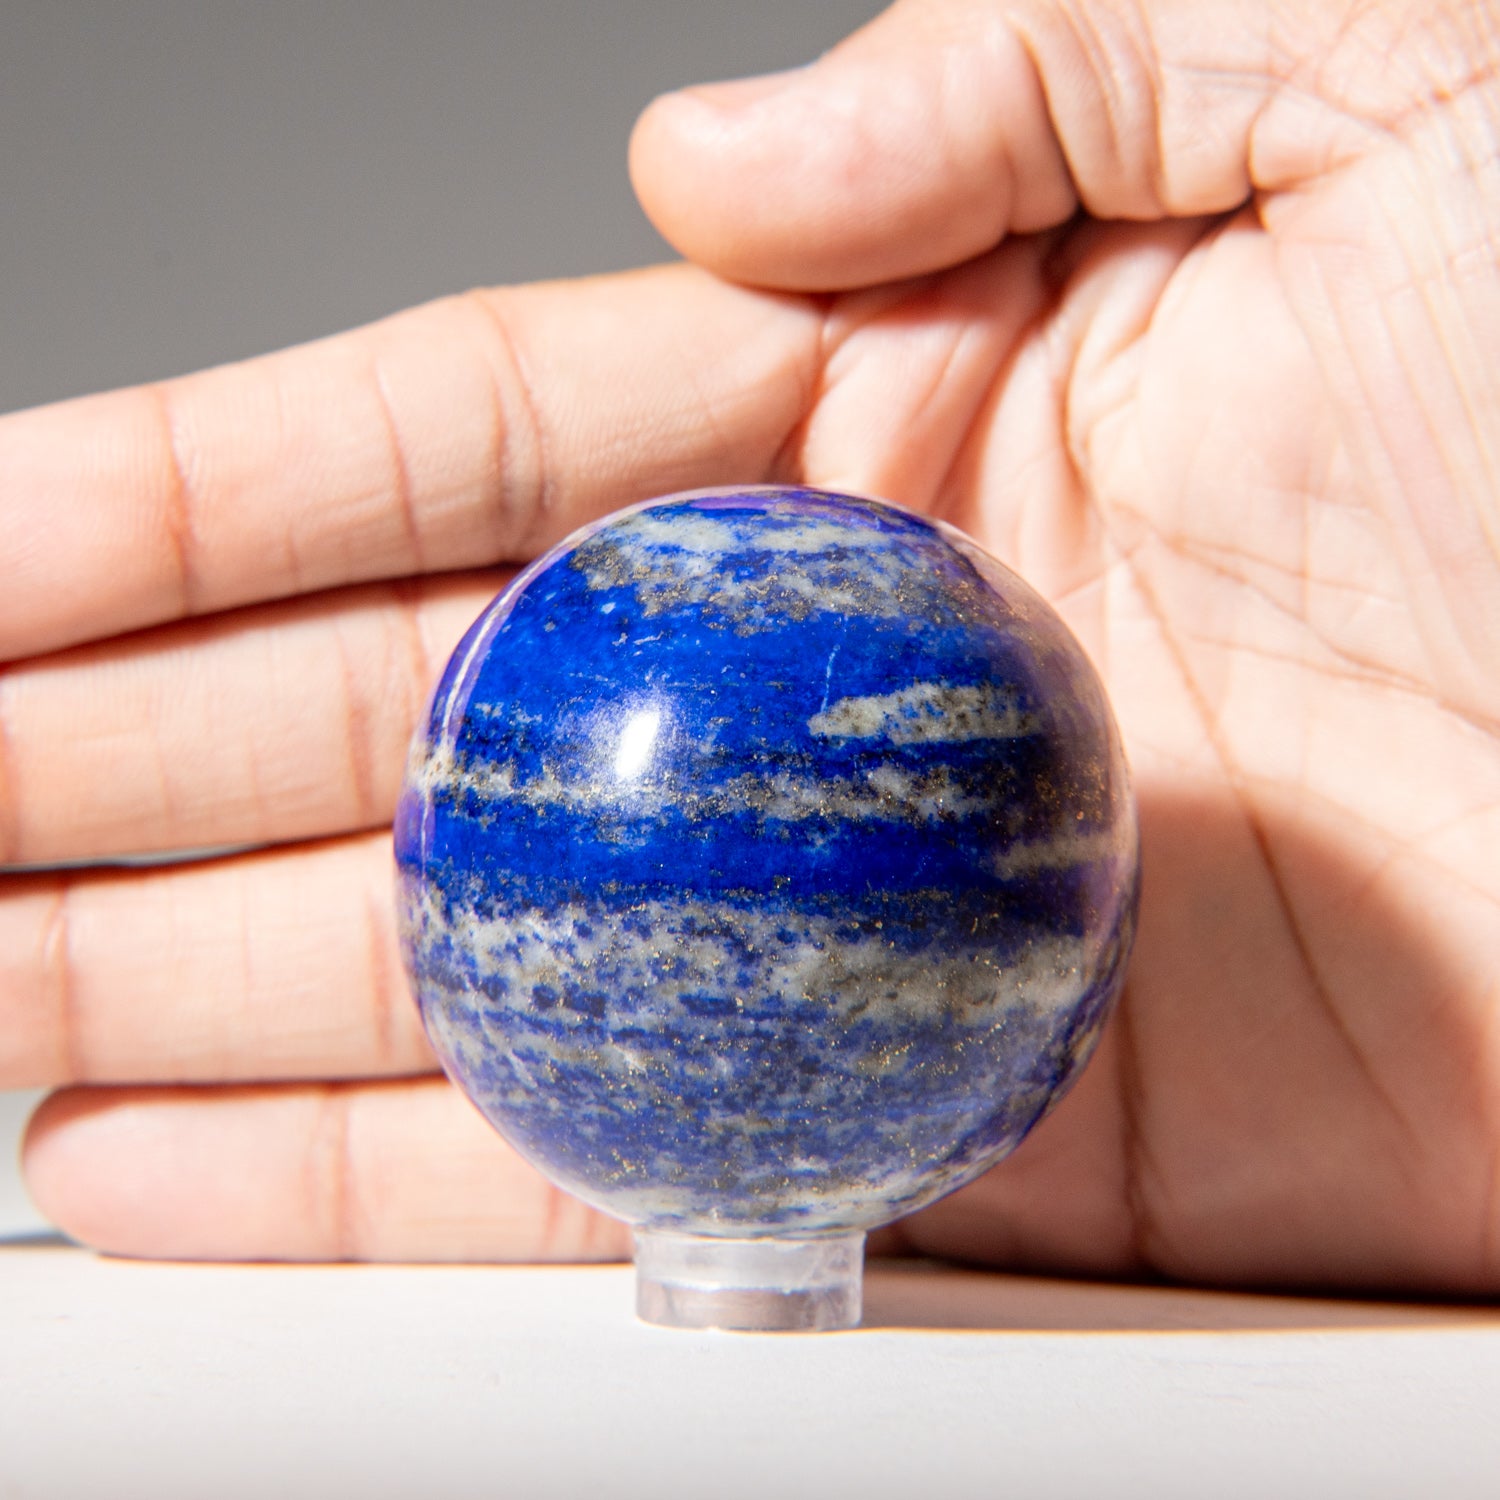 Genuine Polished Lapis Lazuli (2") Sphere from Afghanistan